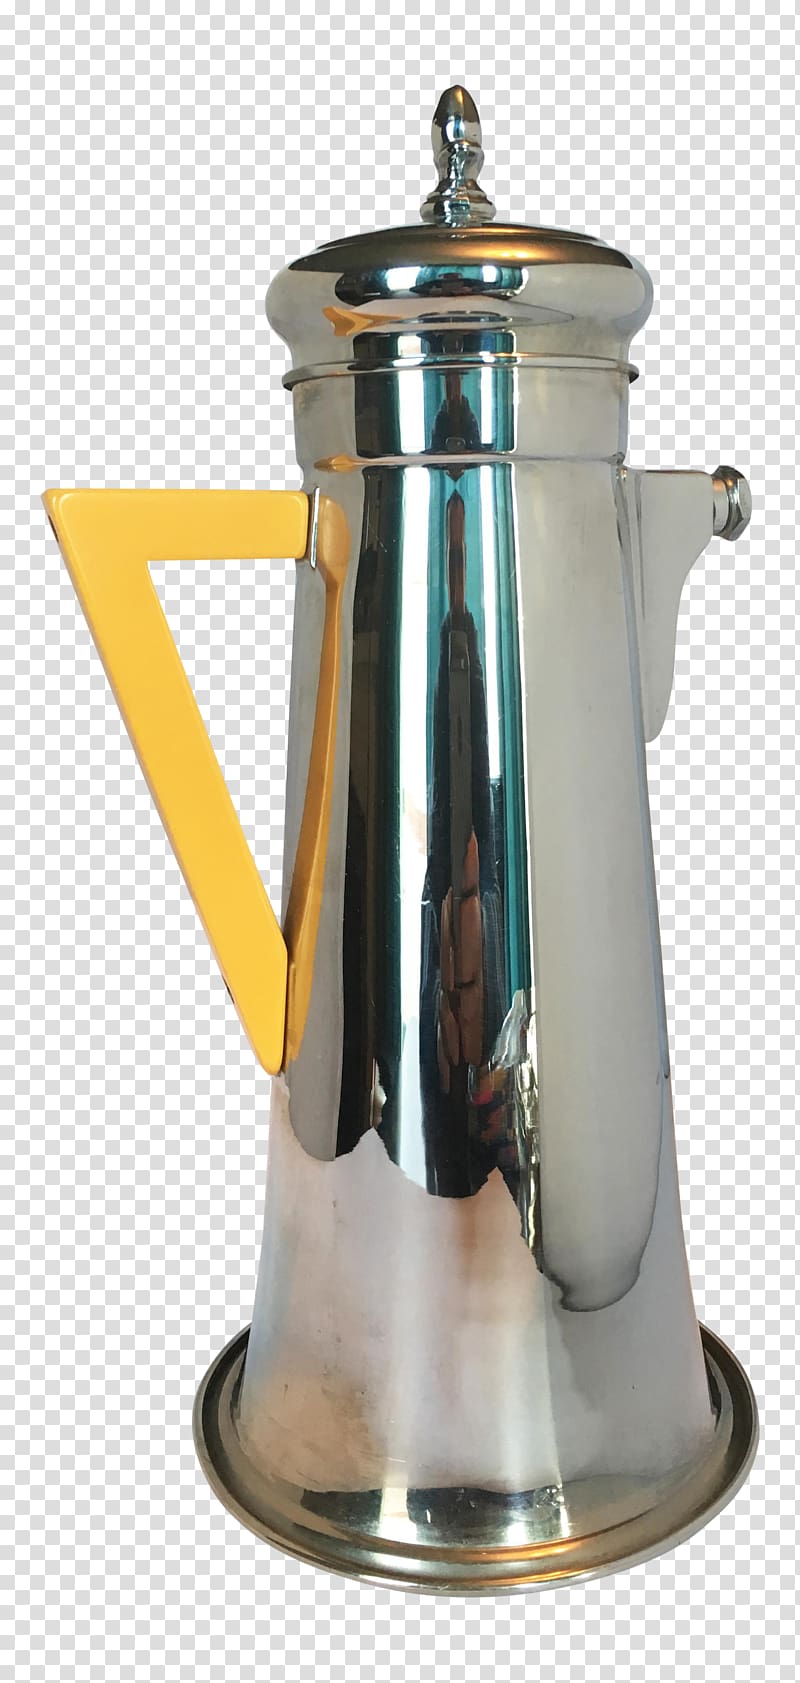 Mug Kettle Coffee percolator French Presses, art deco transparent background PNG clipart